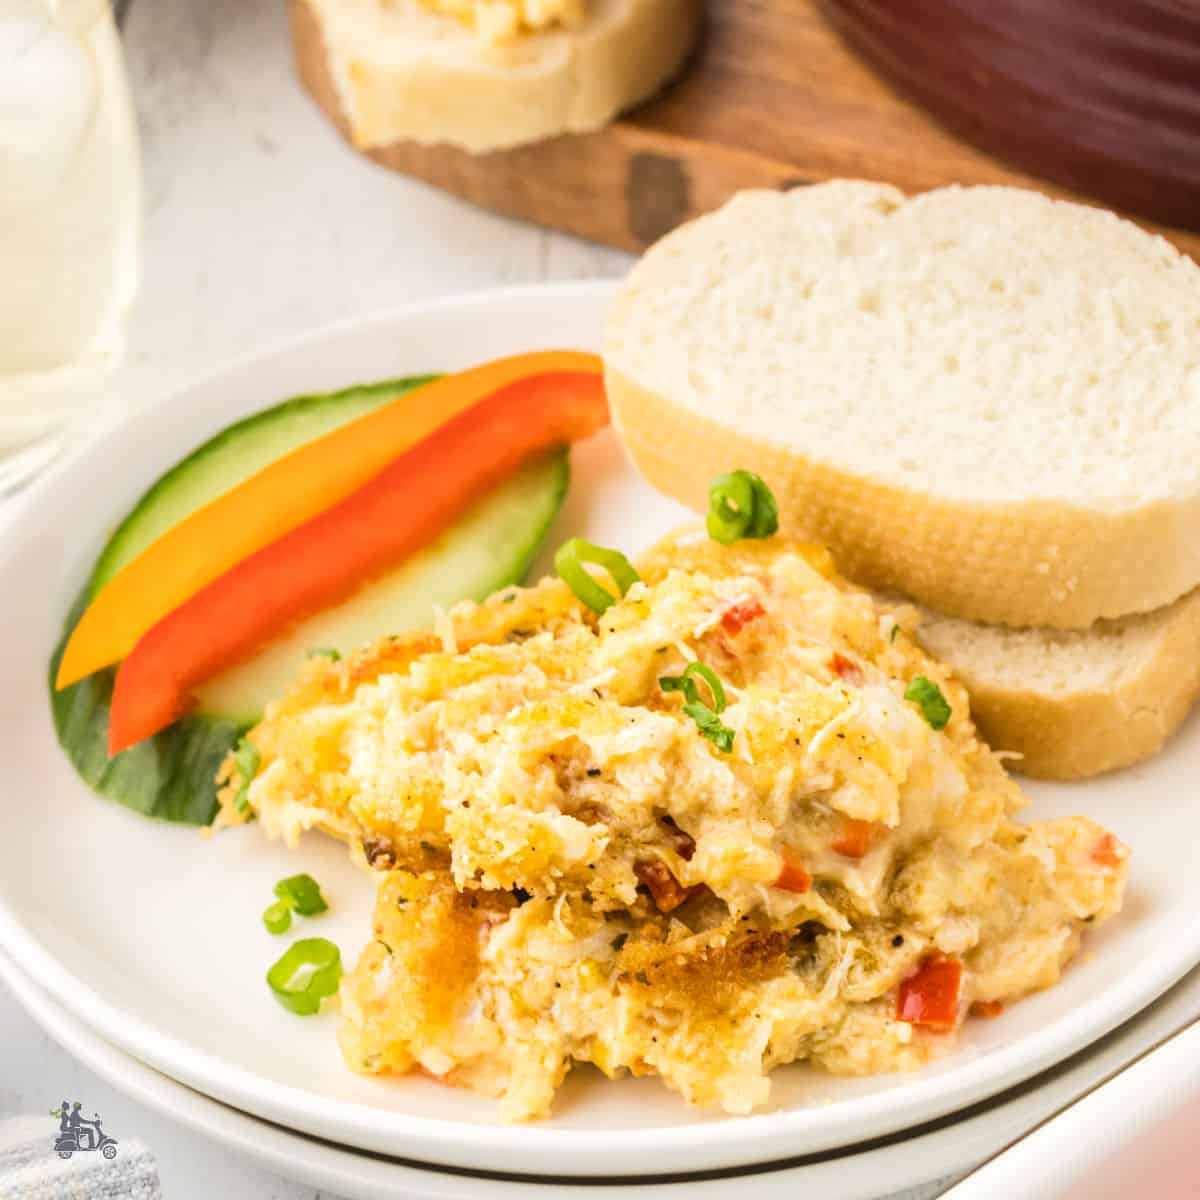 Crab au Gratin on a white plate with slices of white bread, cucumber slices, and red pepper stick.